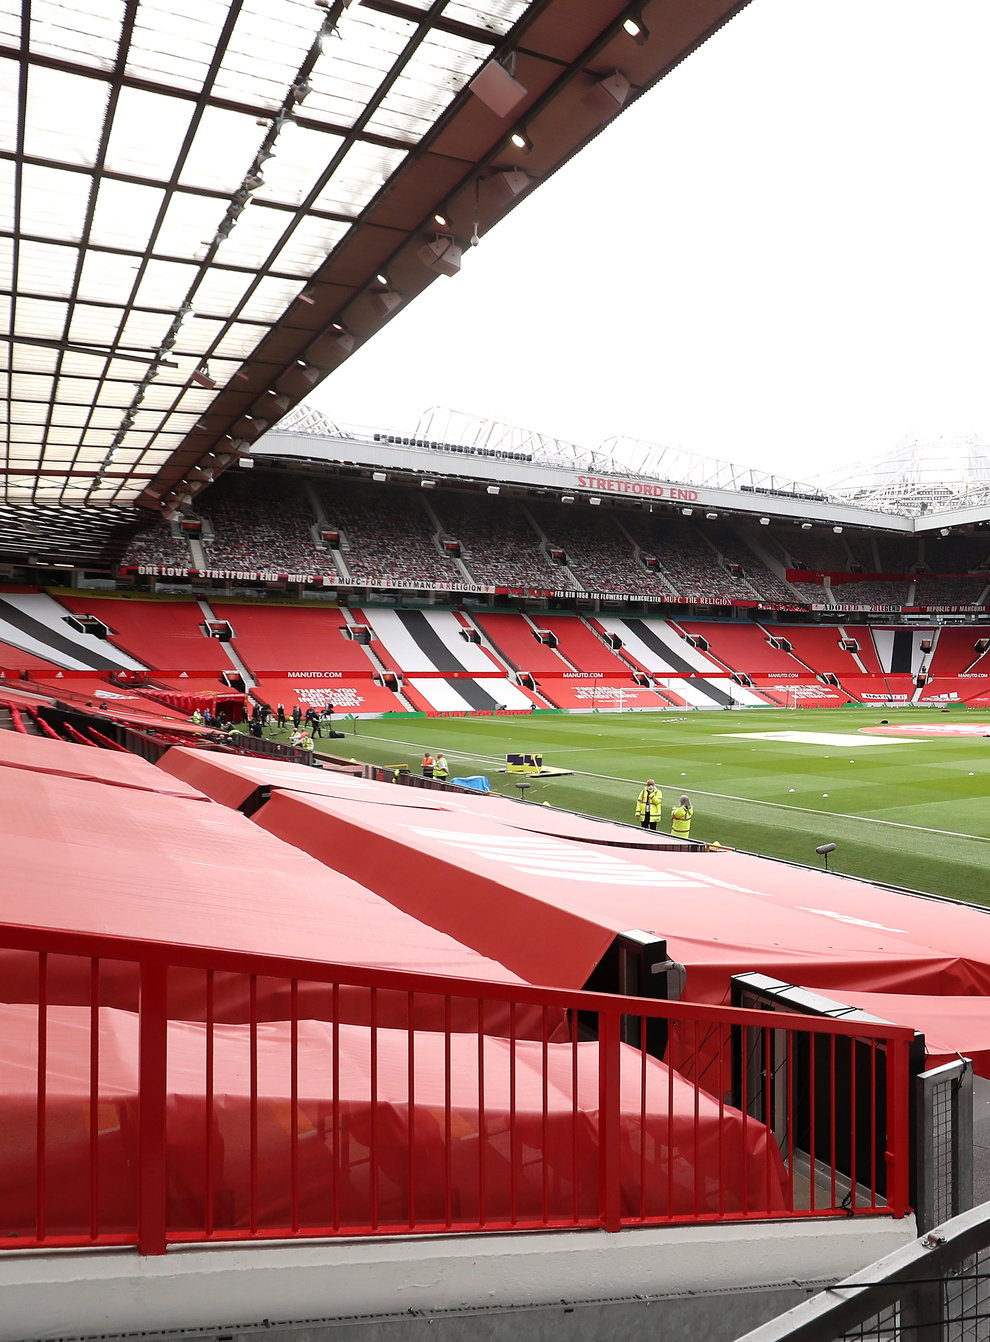 Manchester United have modified Old Trafford to accommodate 23,500 socially-distanced spectators.